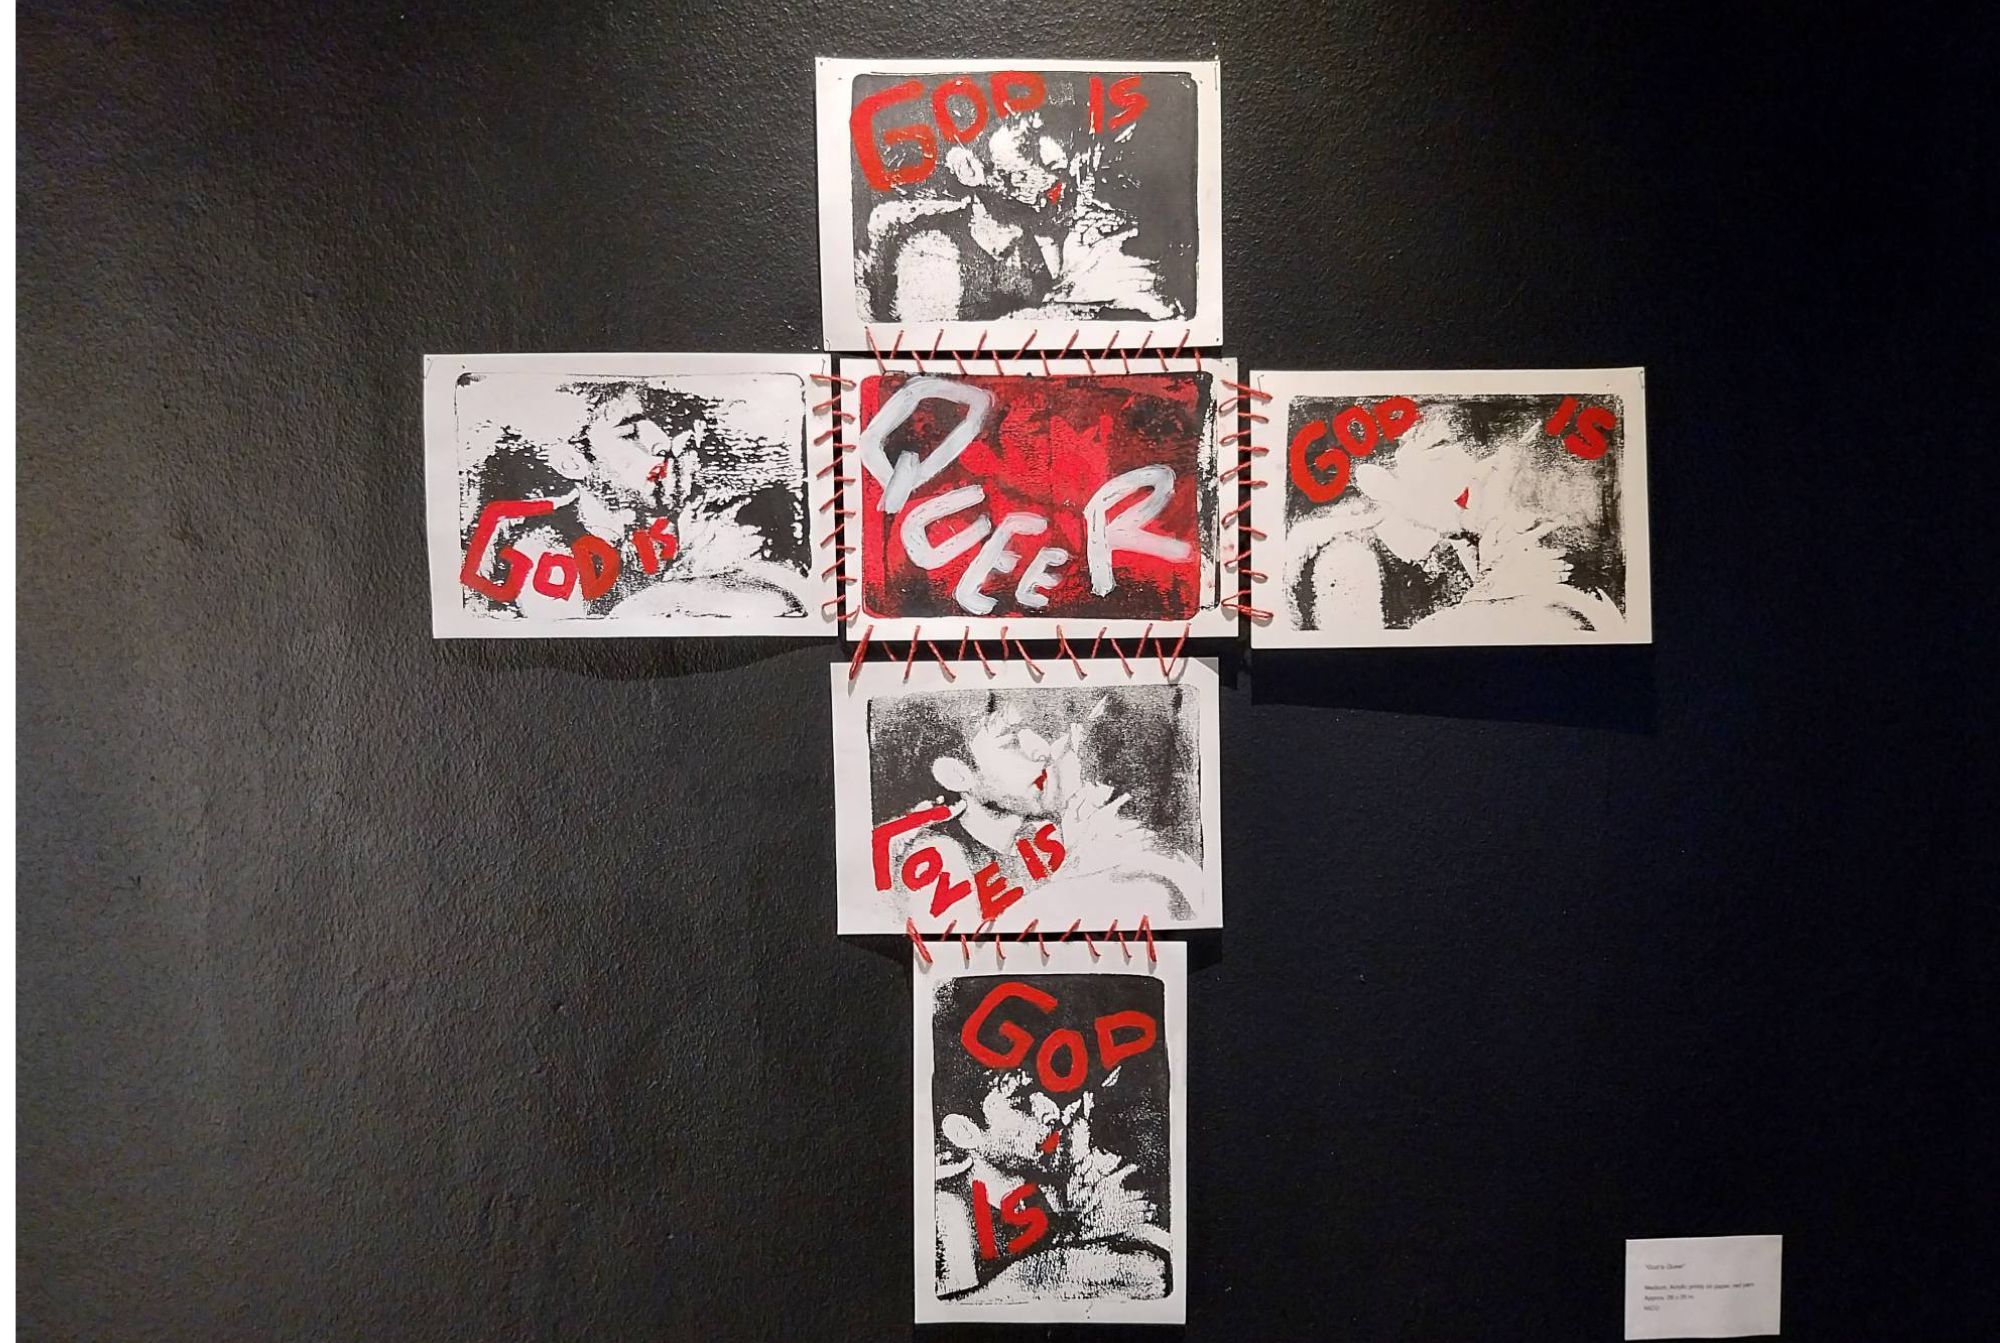 "GOD IS QUEER" by Nico from insectsaresexy. Photo by Elle Yap.